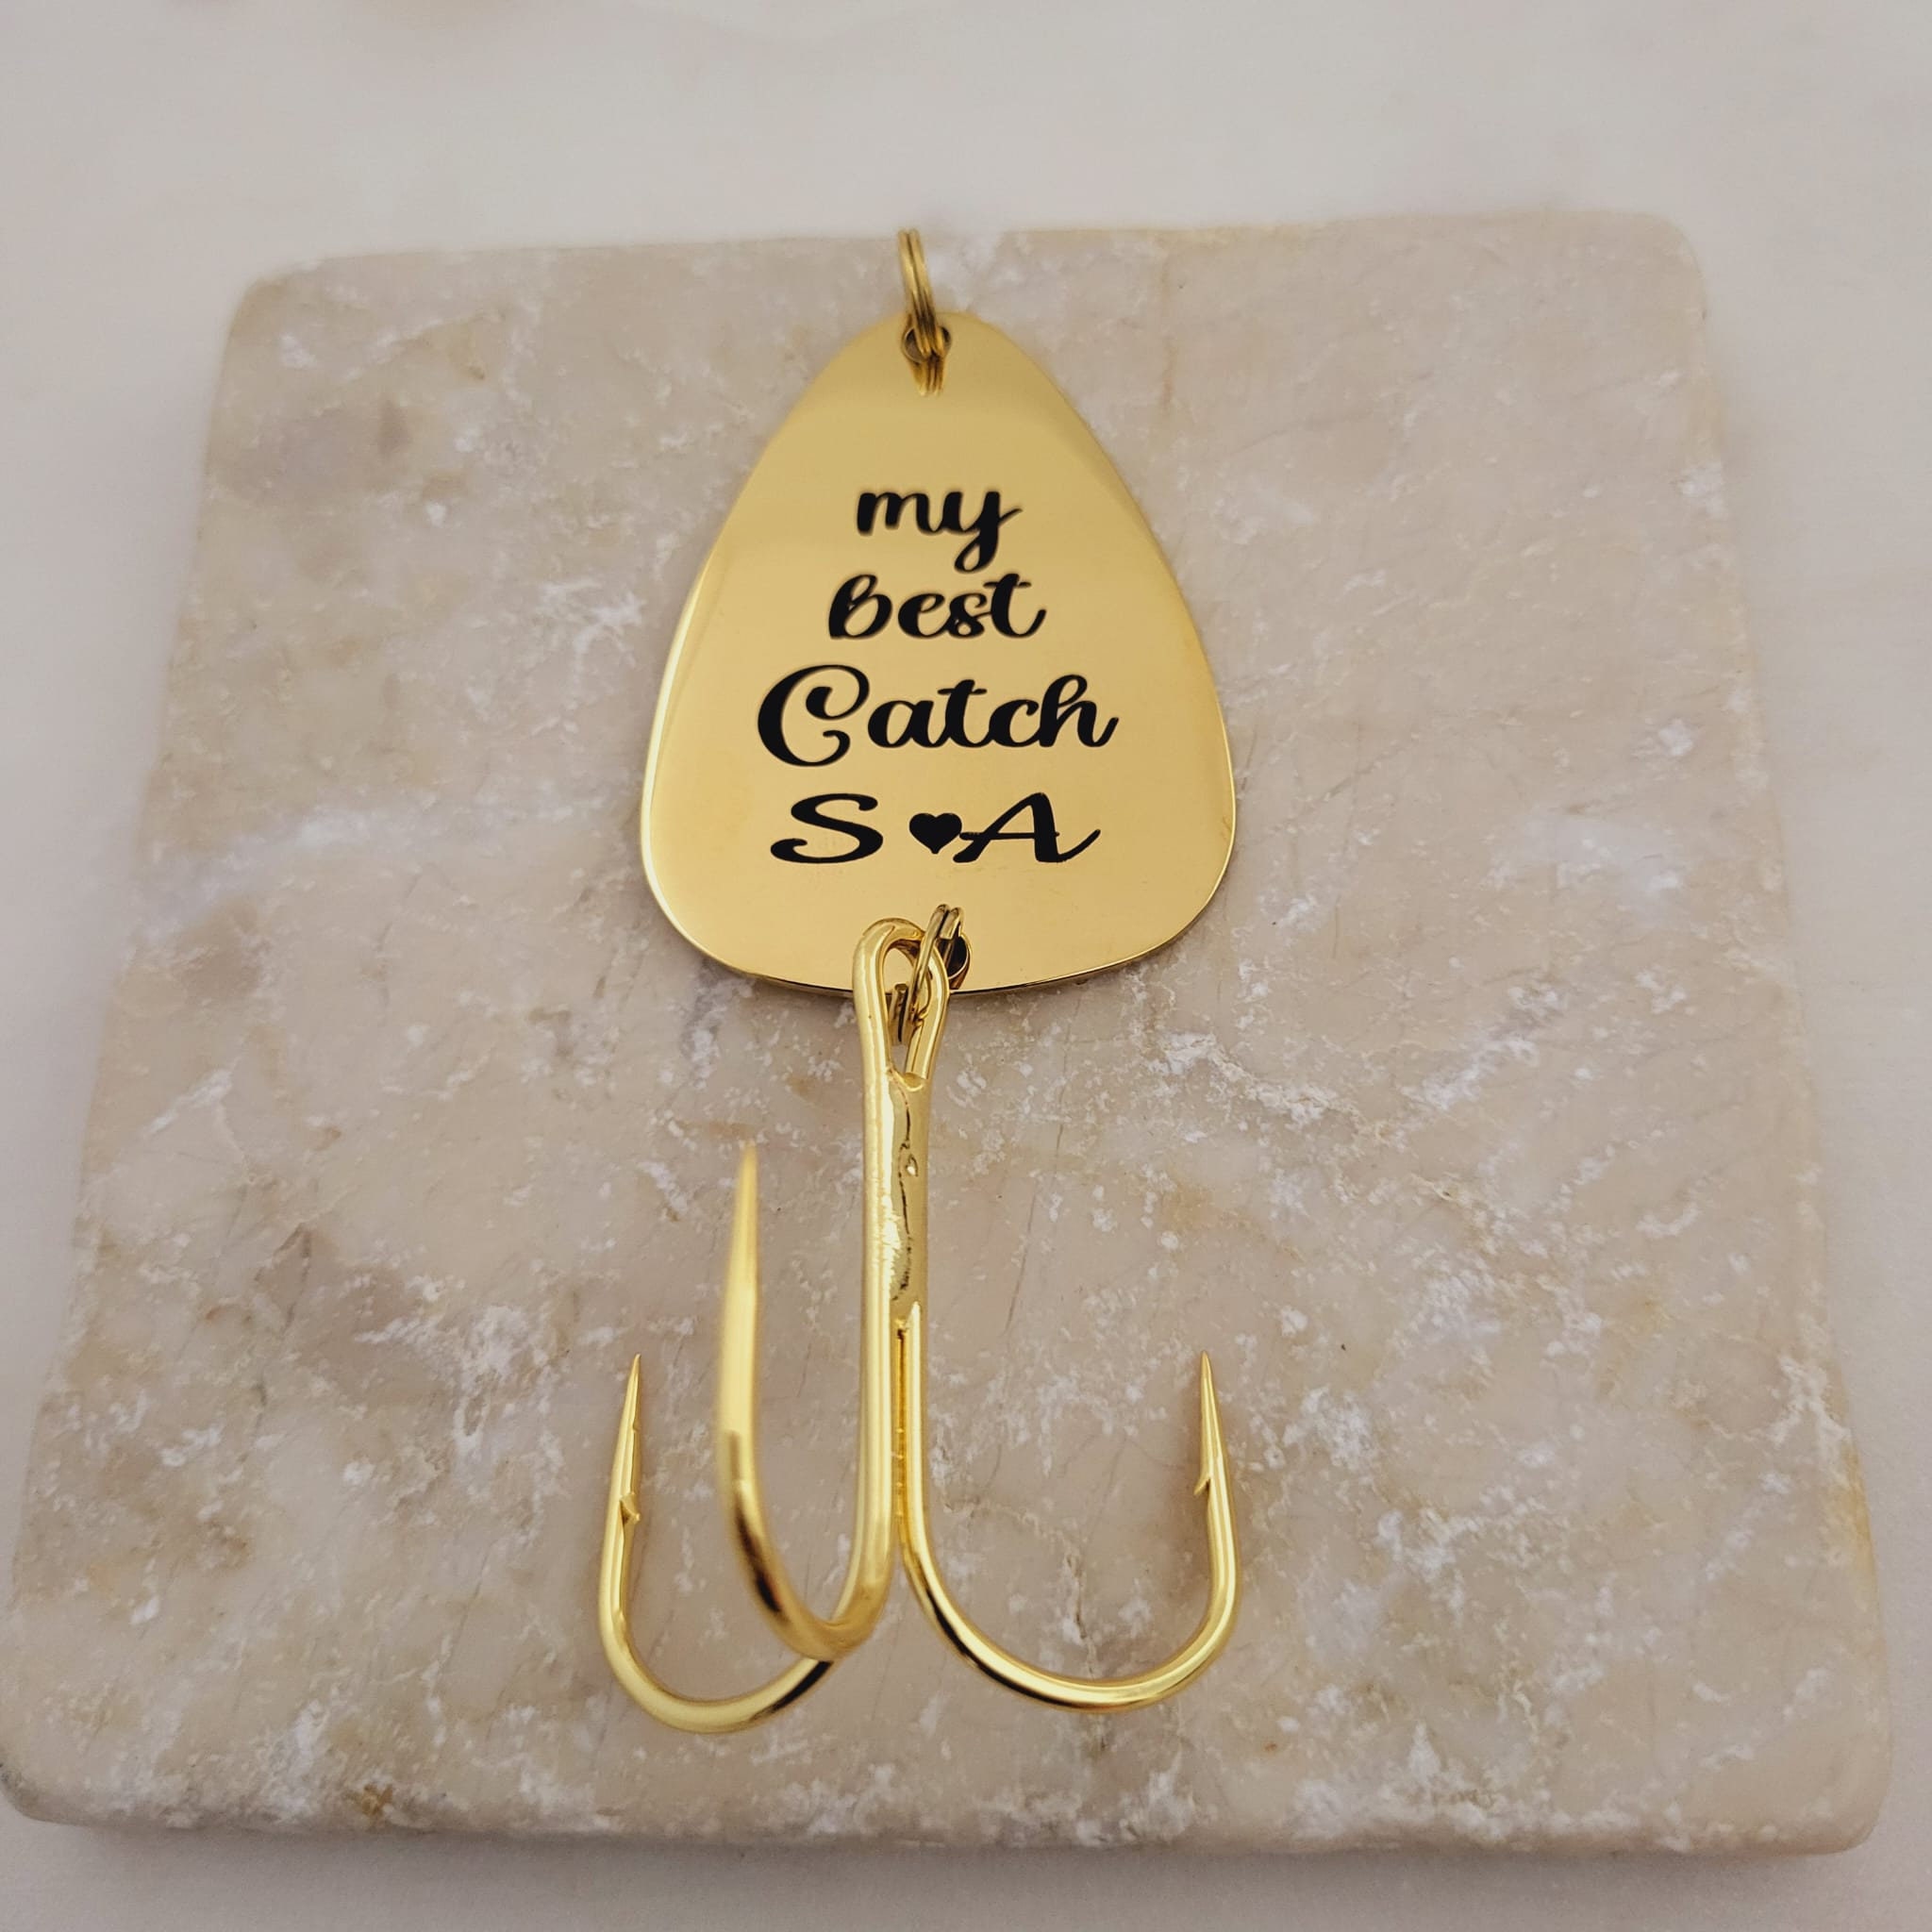 My Best Catch Fish Hook, Mens Valentine Gift Ideas - Personalized Fishing  Lure - Best Catch , Personalized Gift for Boyfriend Husband